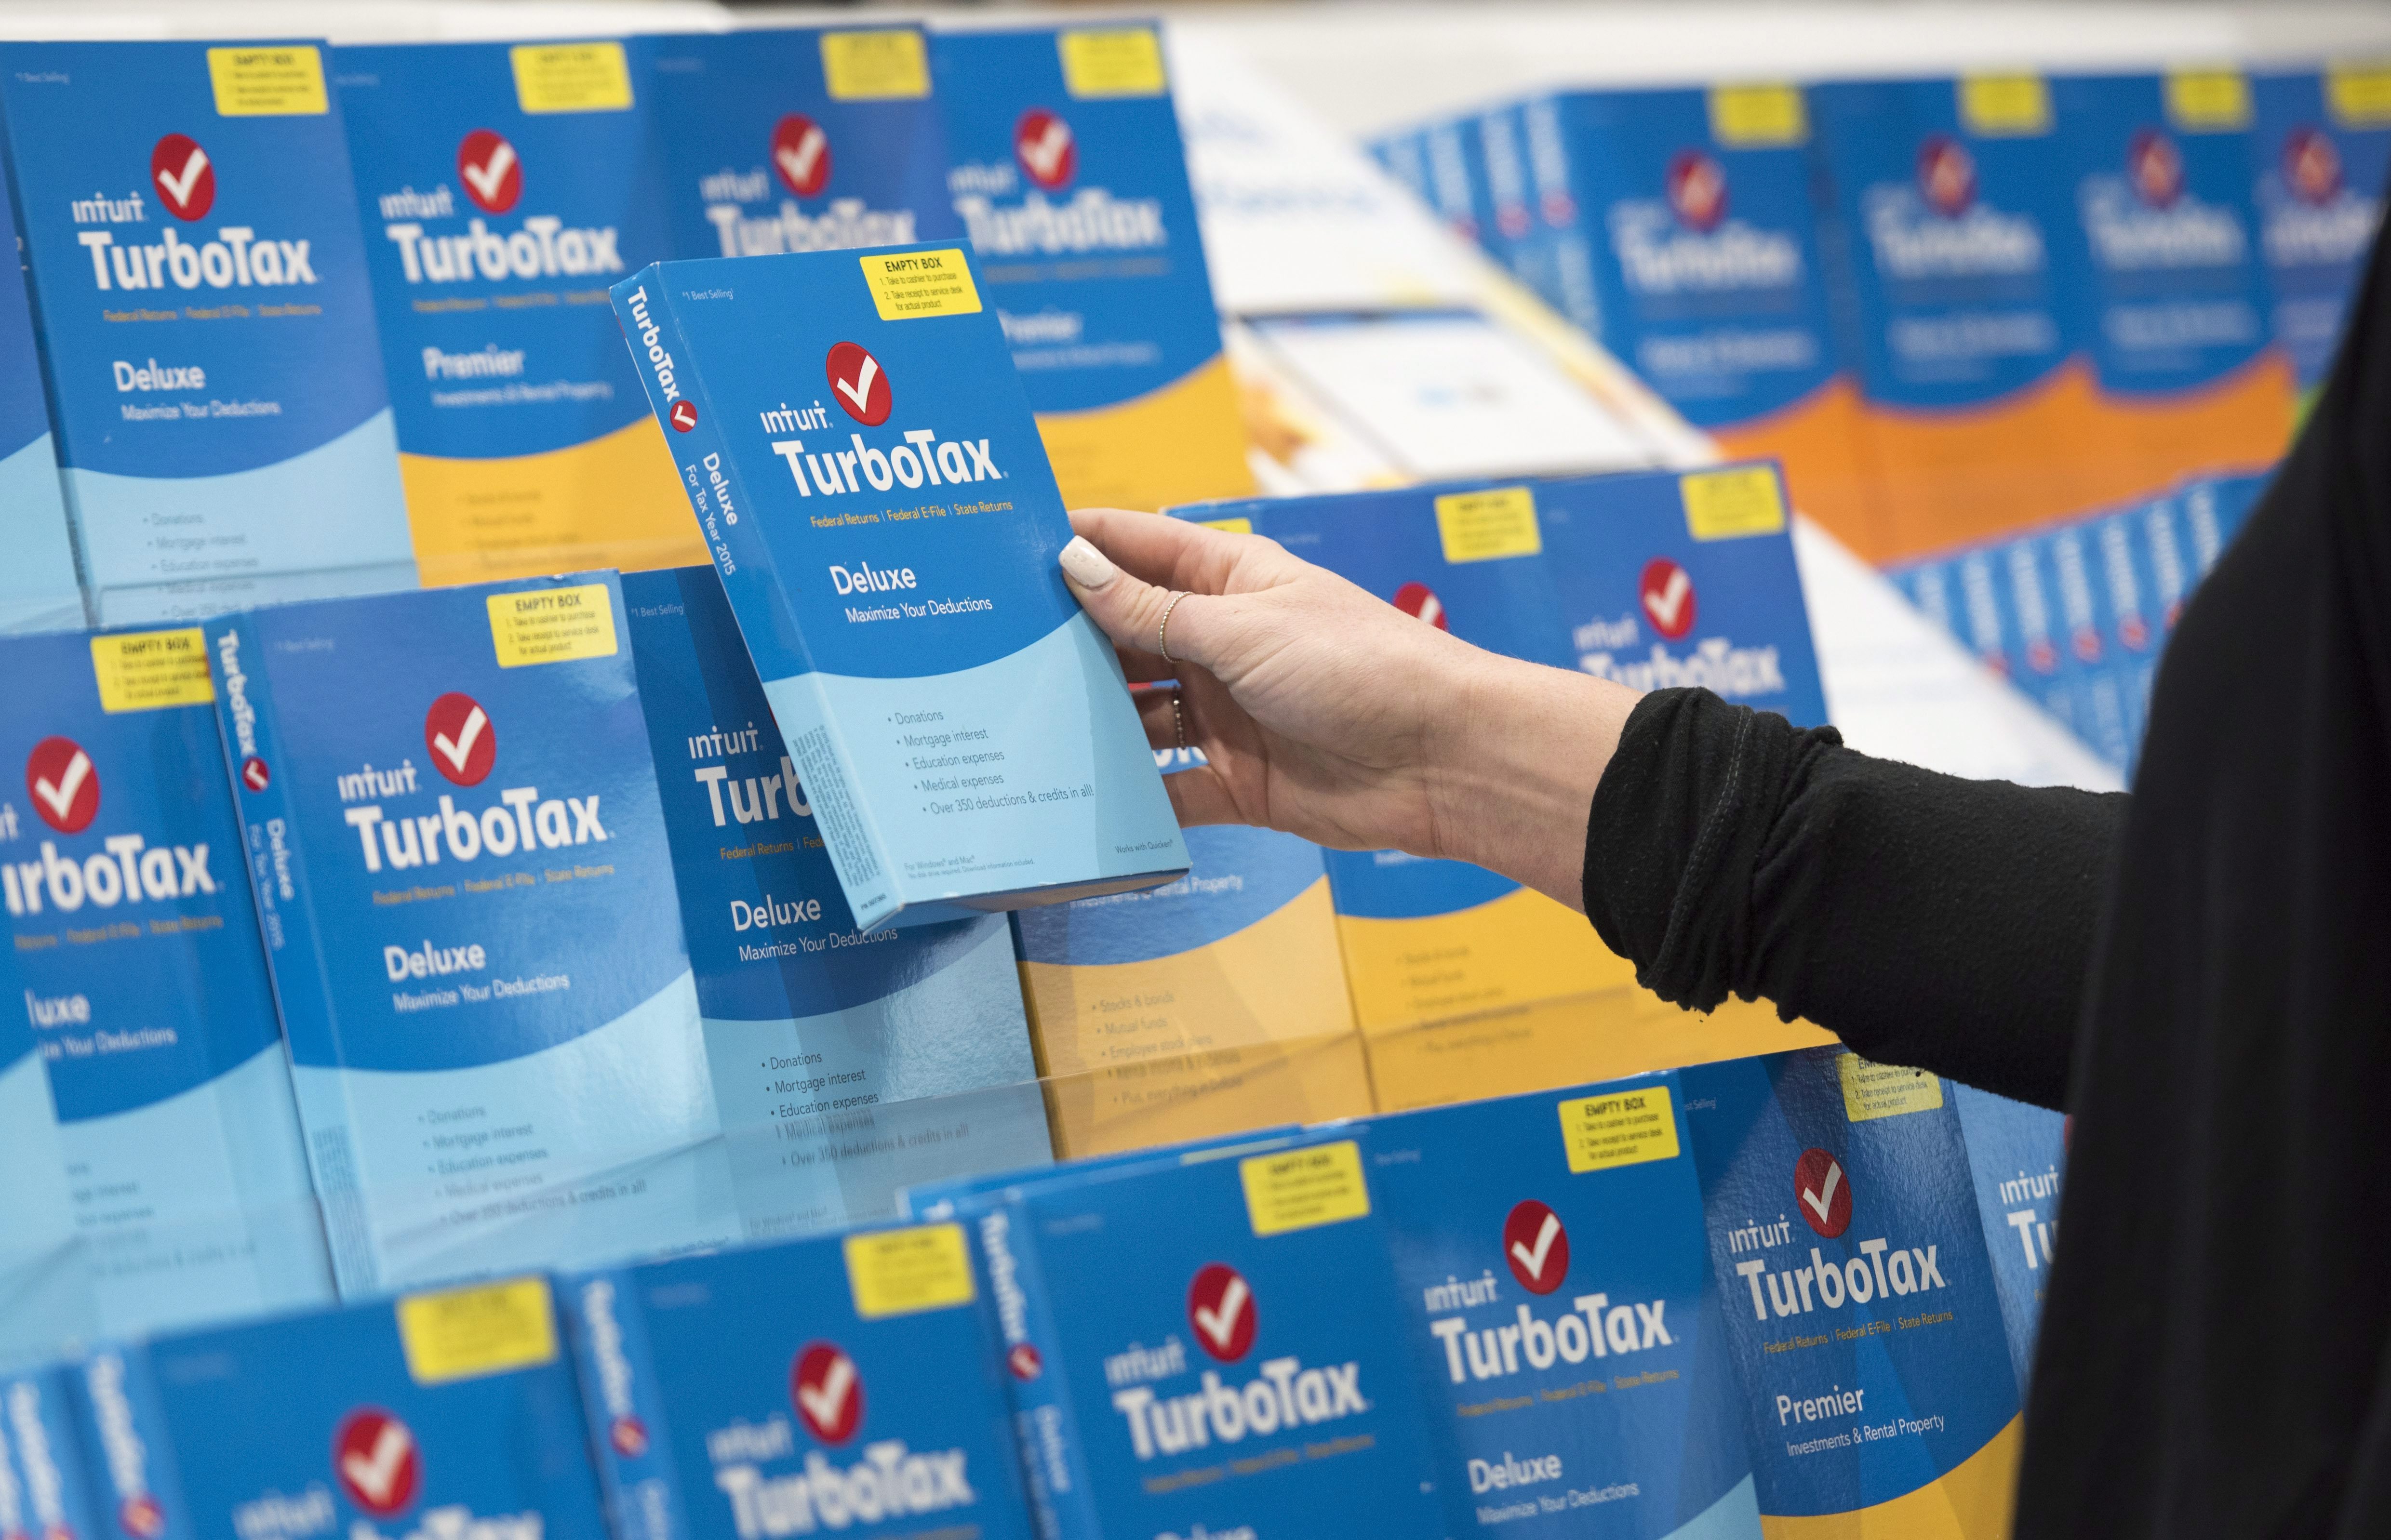 turbotax canada business incorporated